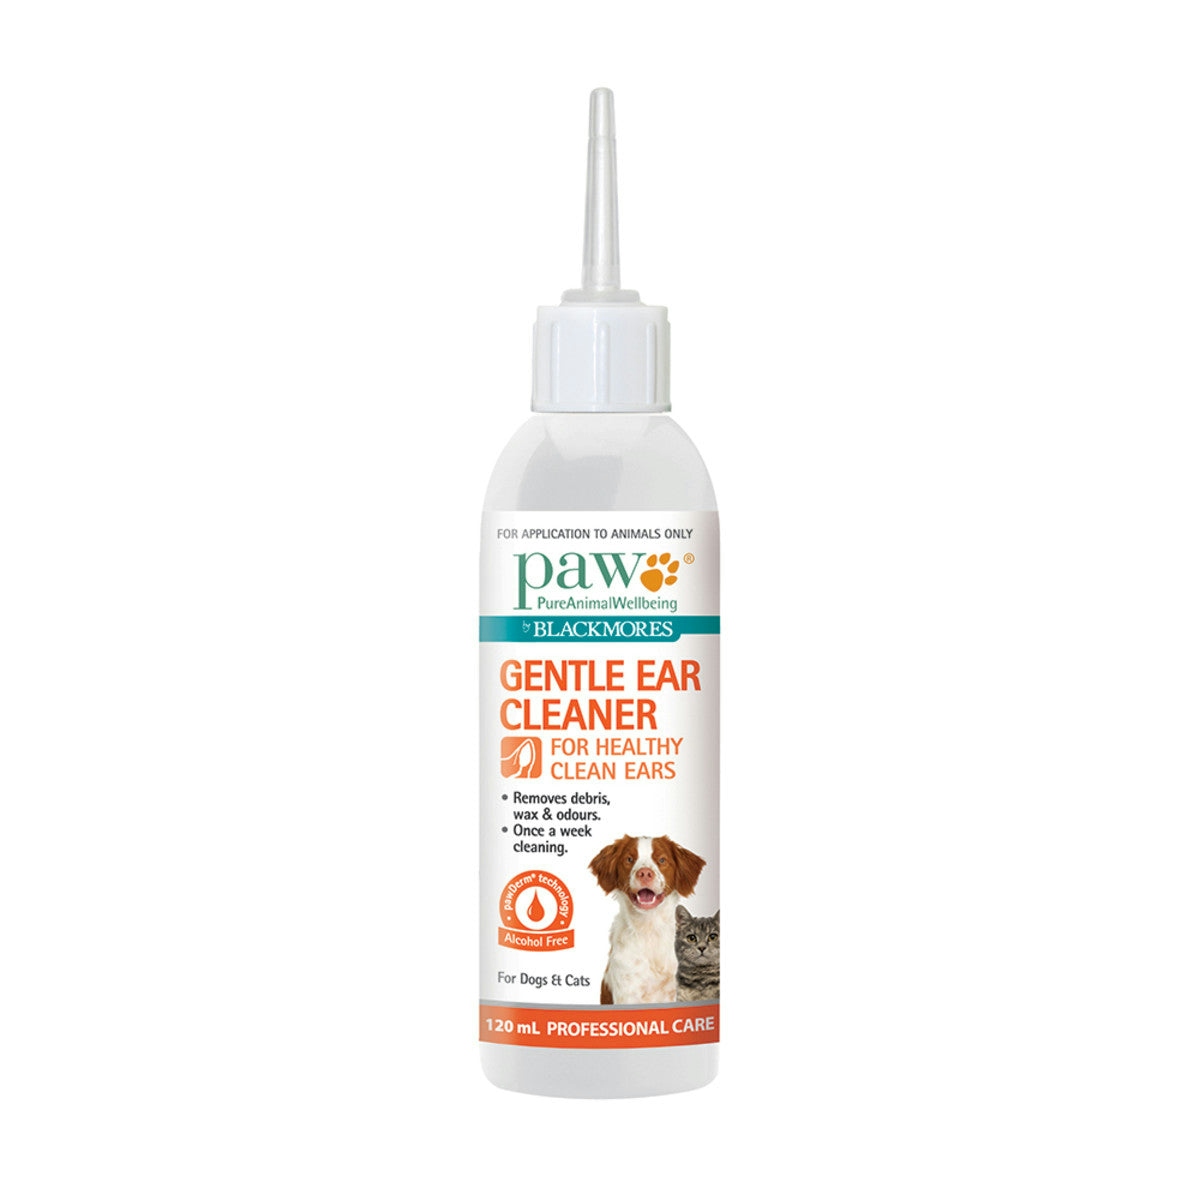 image of PAW By Blackmores Gentle Ear Cleaner 120ml on white background